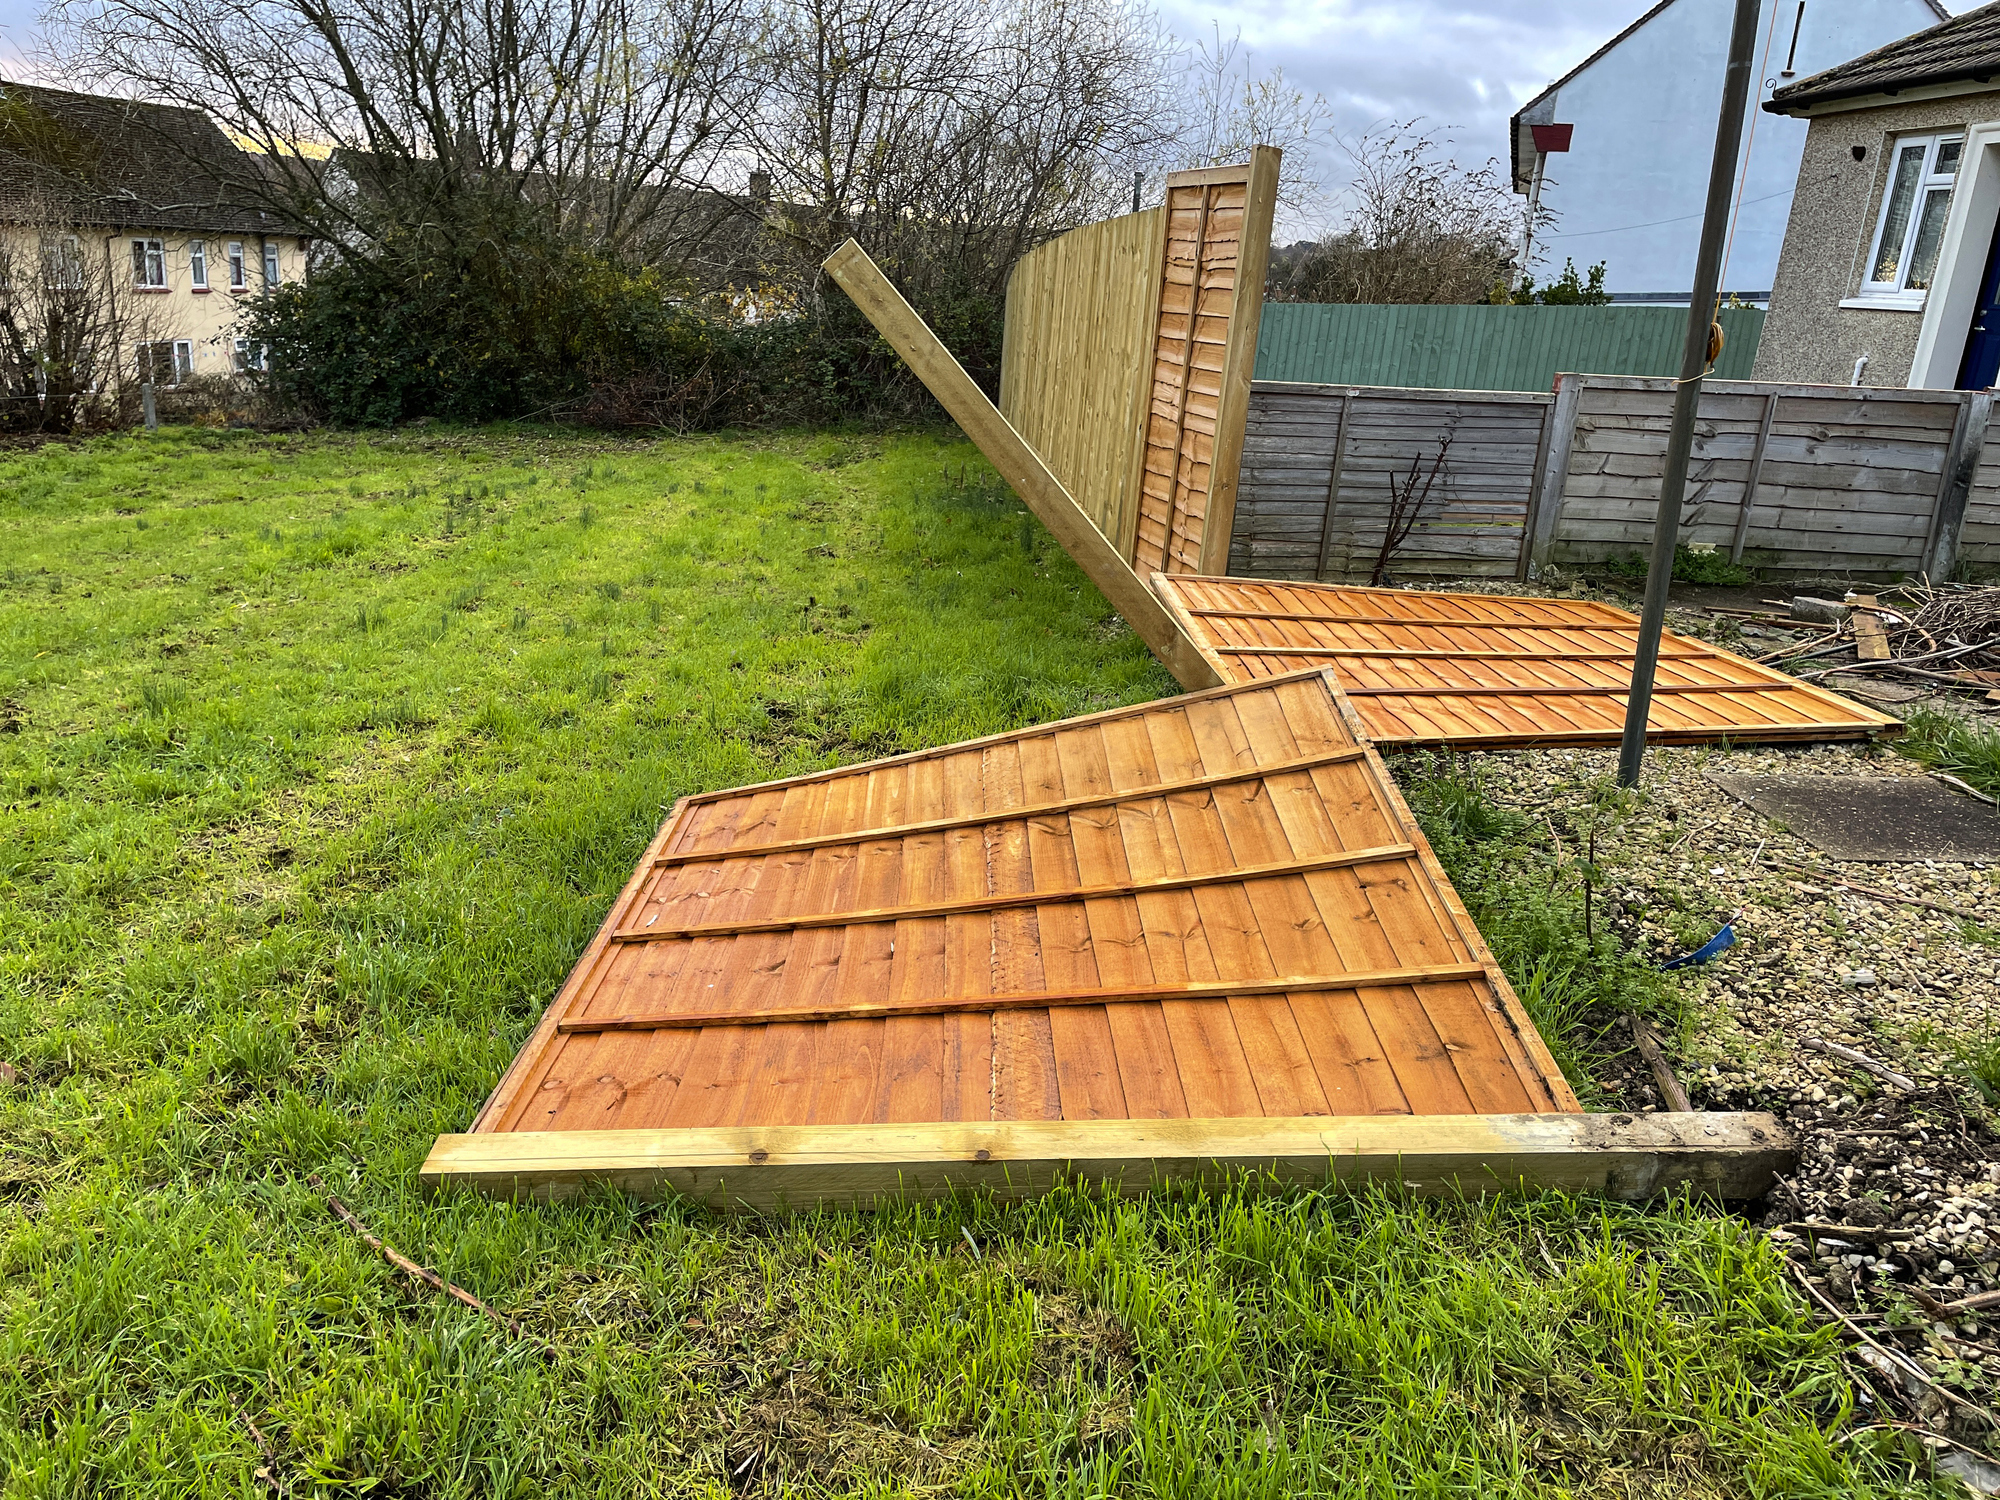 Image of fallen garden fence panels blown over by wind